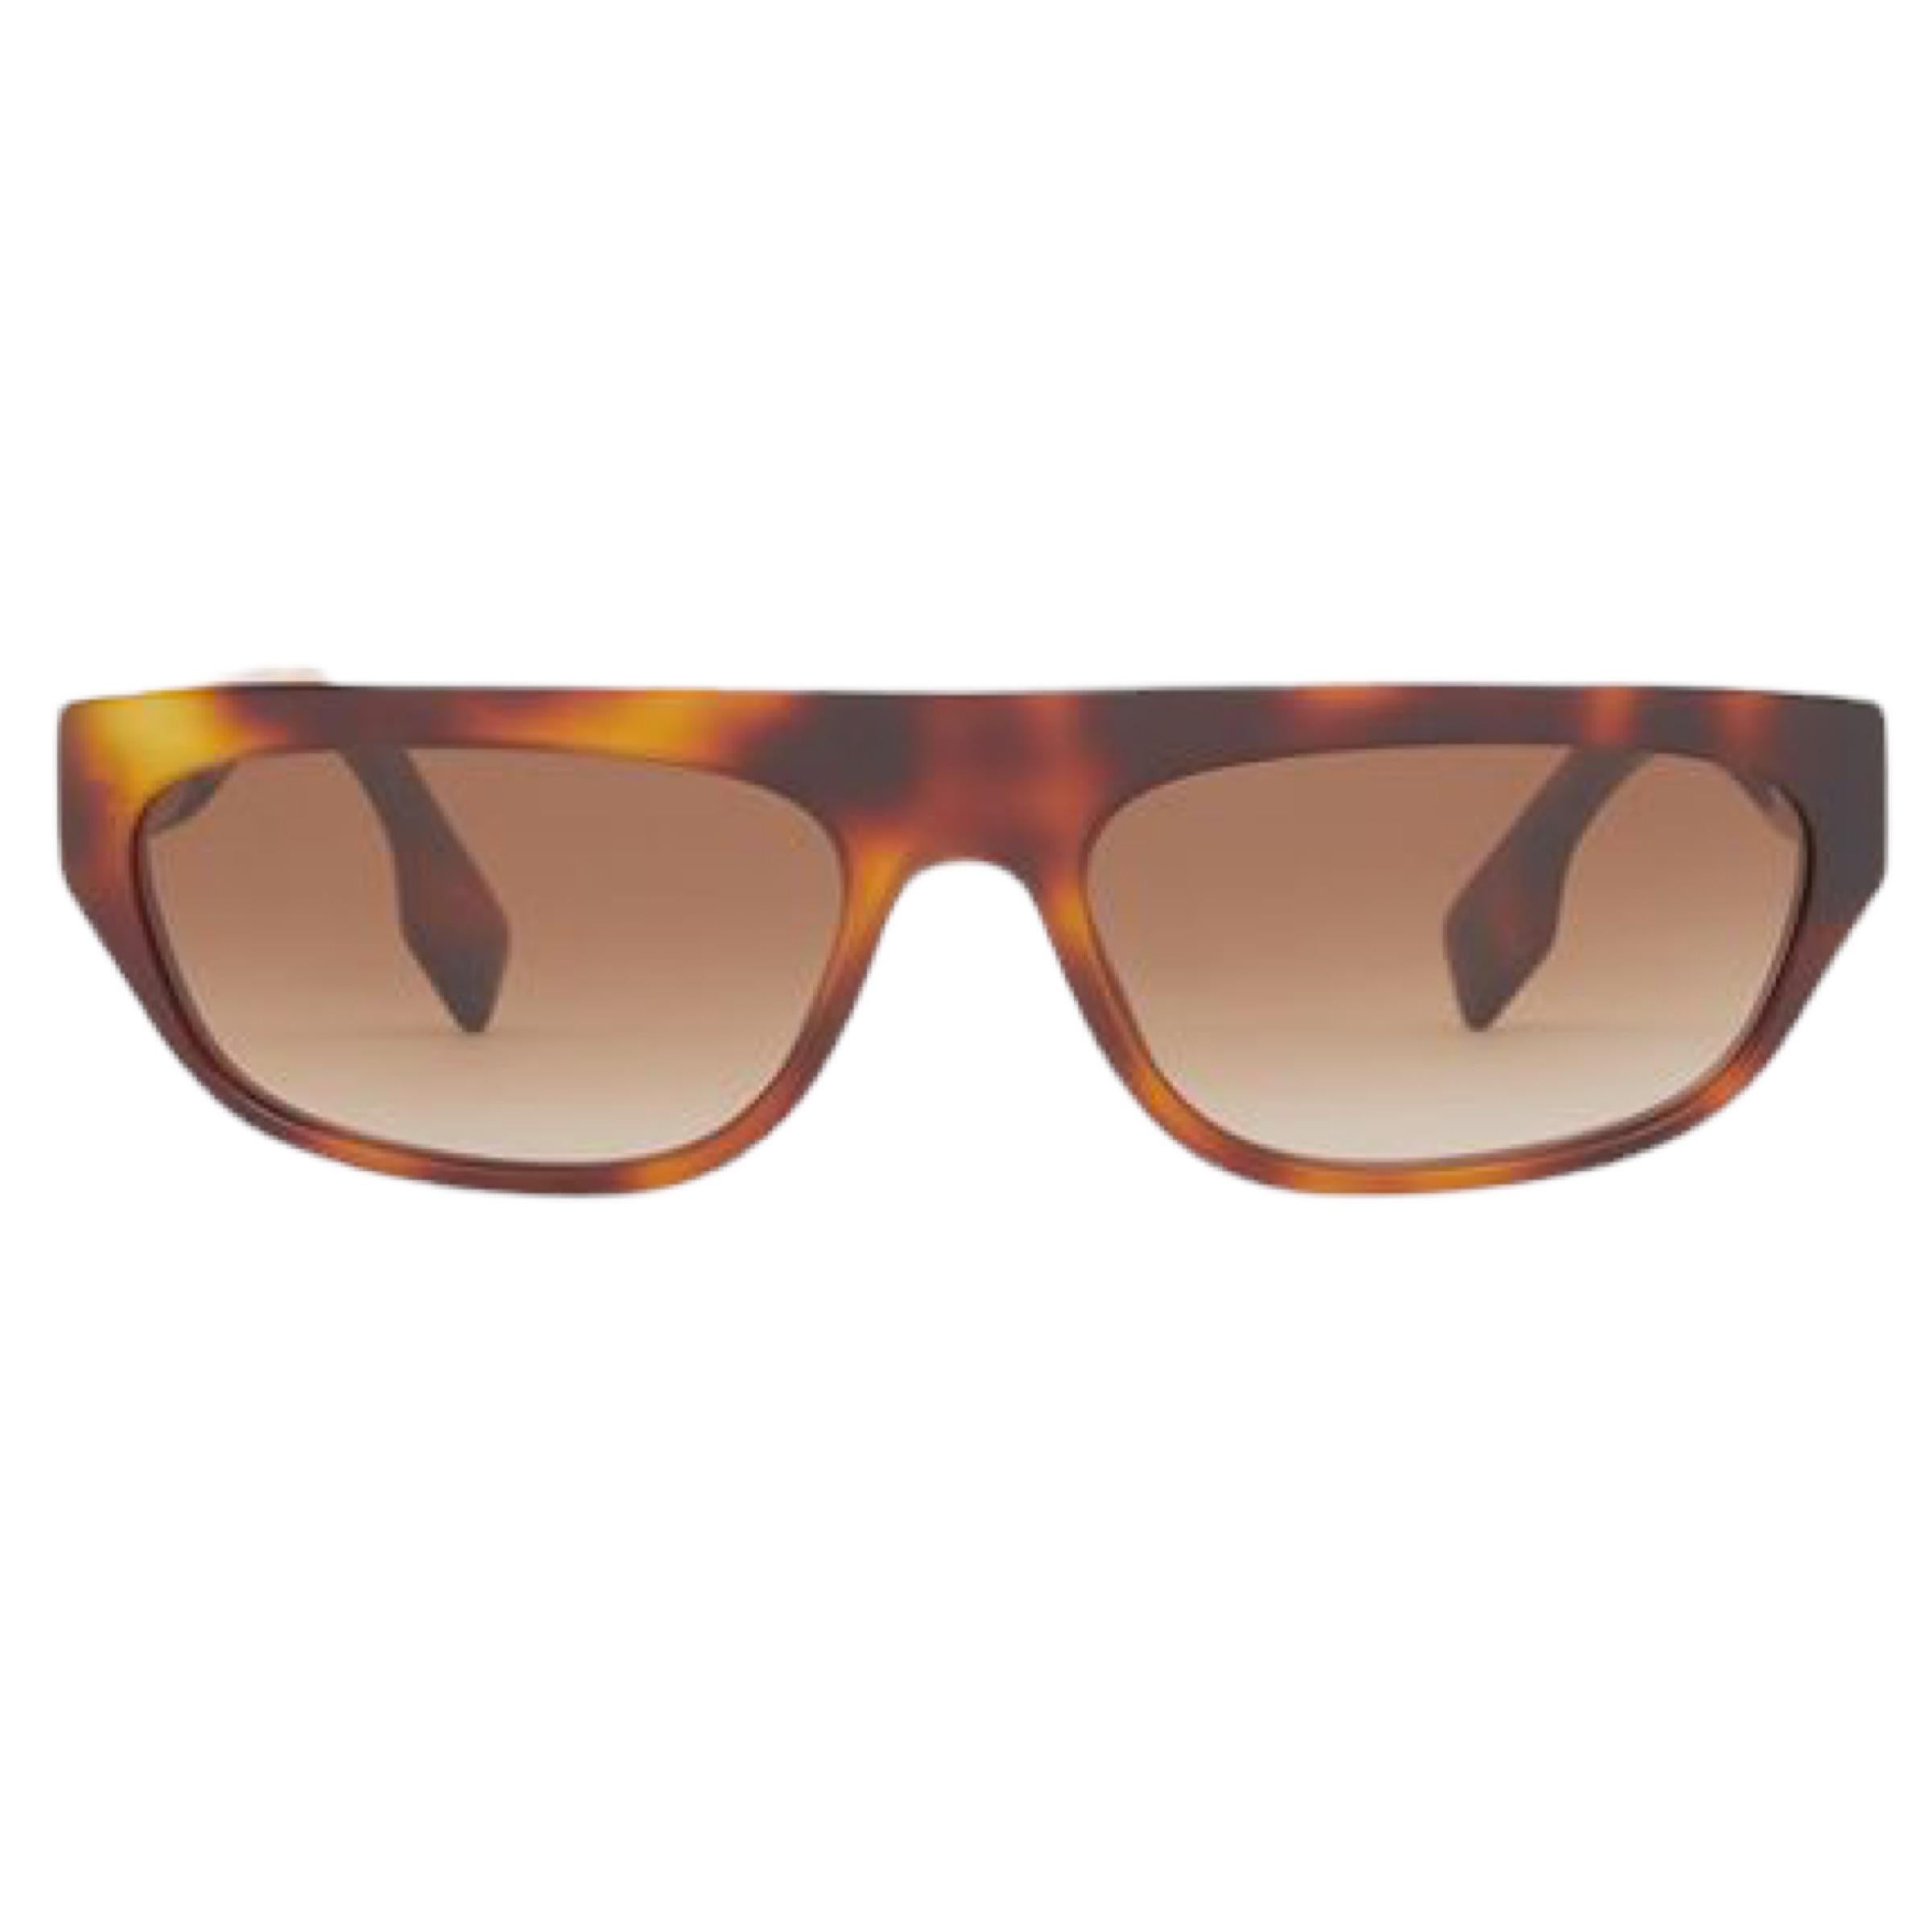 New Burberry Brown Havana Frame Brown Lens Rectangular Sunglasses

Authenticity Guaranteed

DETAILS
Brand: Burberry
Condition: Brand new
Gender: Unisex
Category: Sunglasses
Frame color: Brown havana
Lens color: Brown
Material: Acetate

Made in